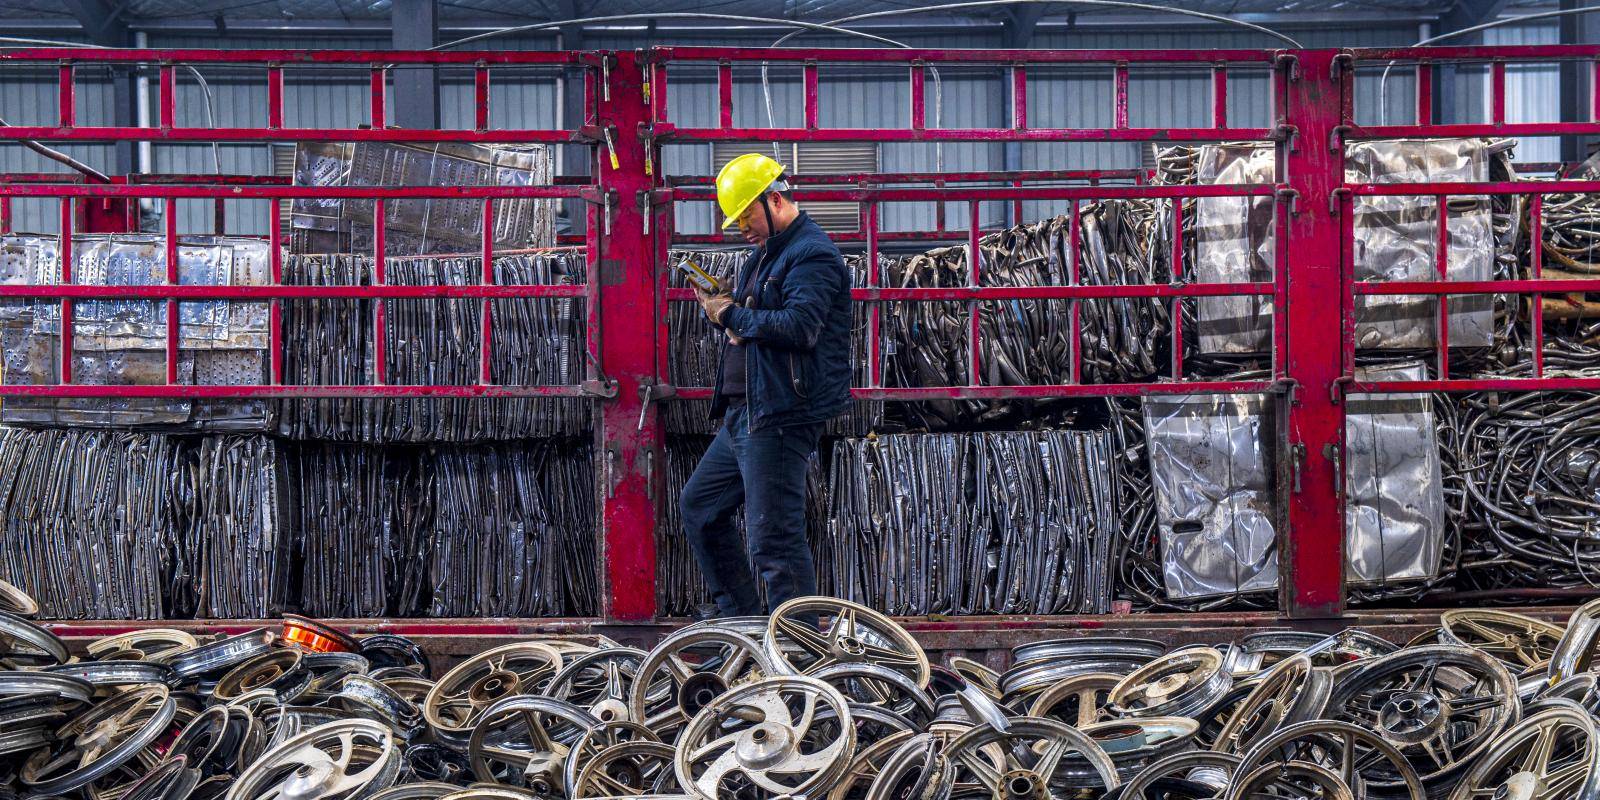 A worker sorts scrap metal to be processed at an aluminium recycling plant in Shaoyang, Hunan Province, China, on 16 December 2021.